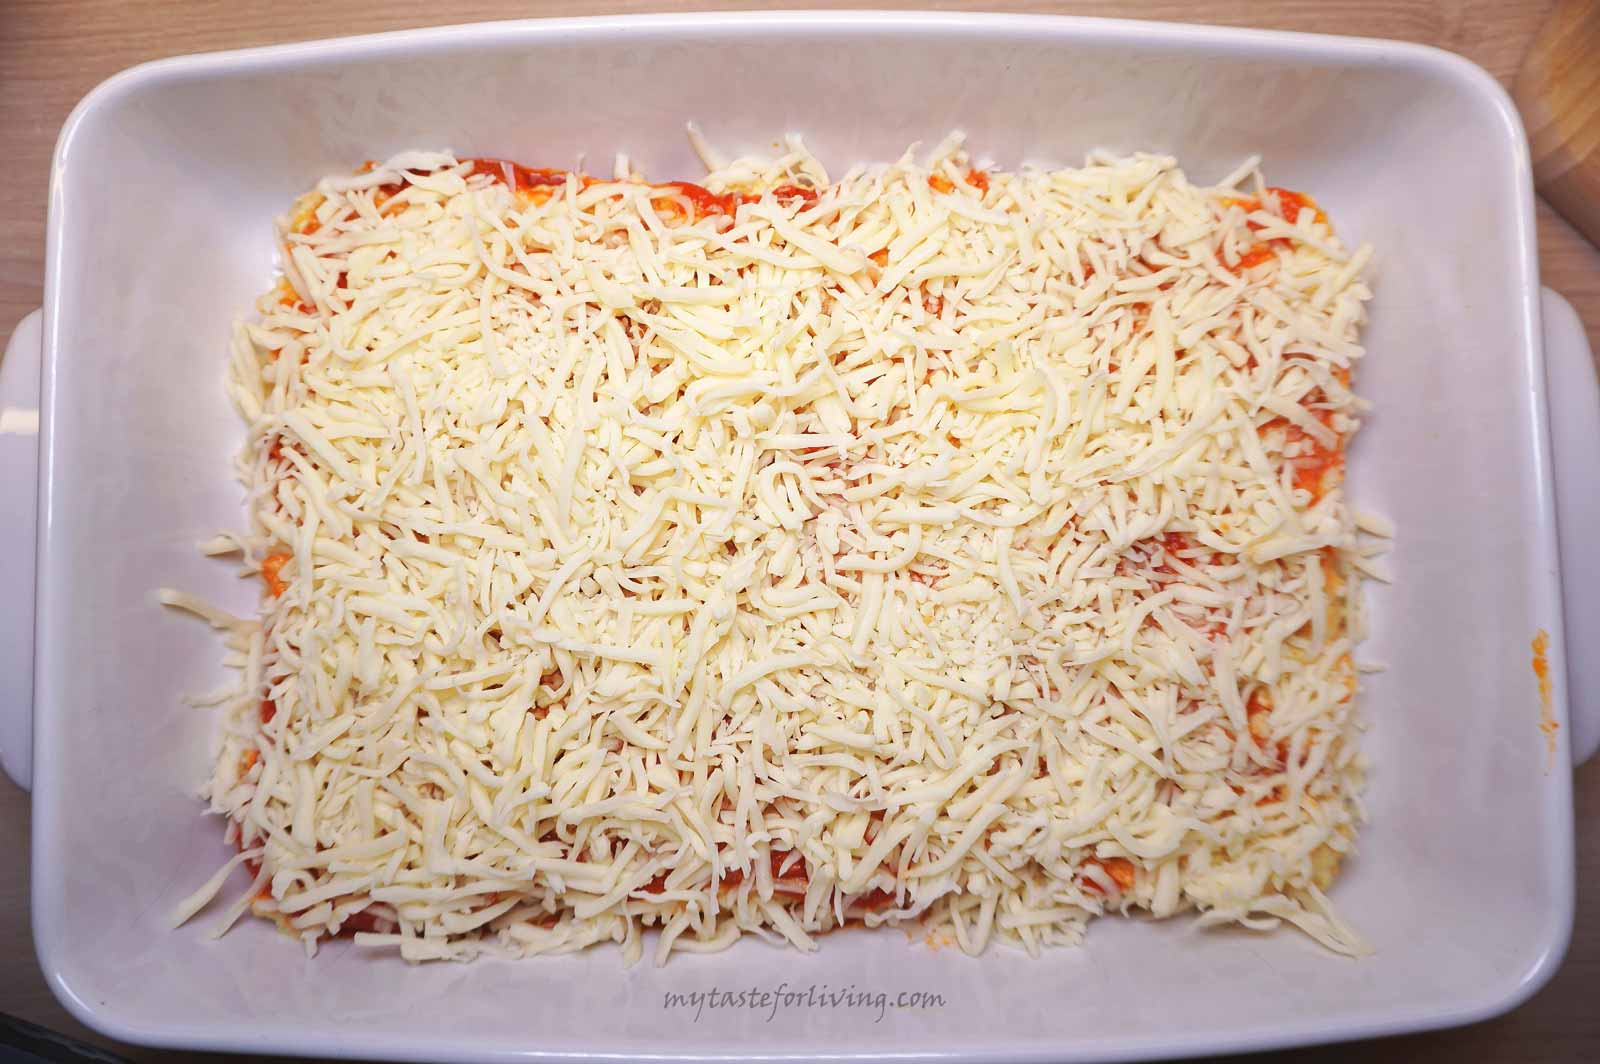 I love lasagna! And by preparing it in this way I managed to impress the children at home! For the preparation of the lasagna I use home made tomato sauce with basil, stewed zucchini, carrots and onions with parmesan and ricotta, lasagna noodles and grated mozzarella or yellow cheese.